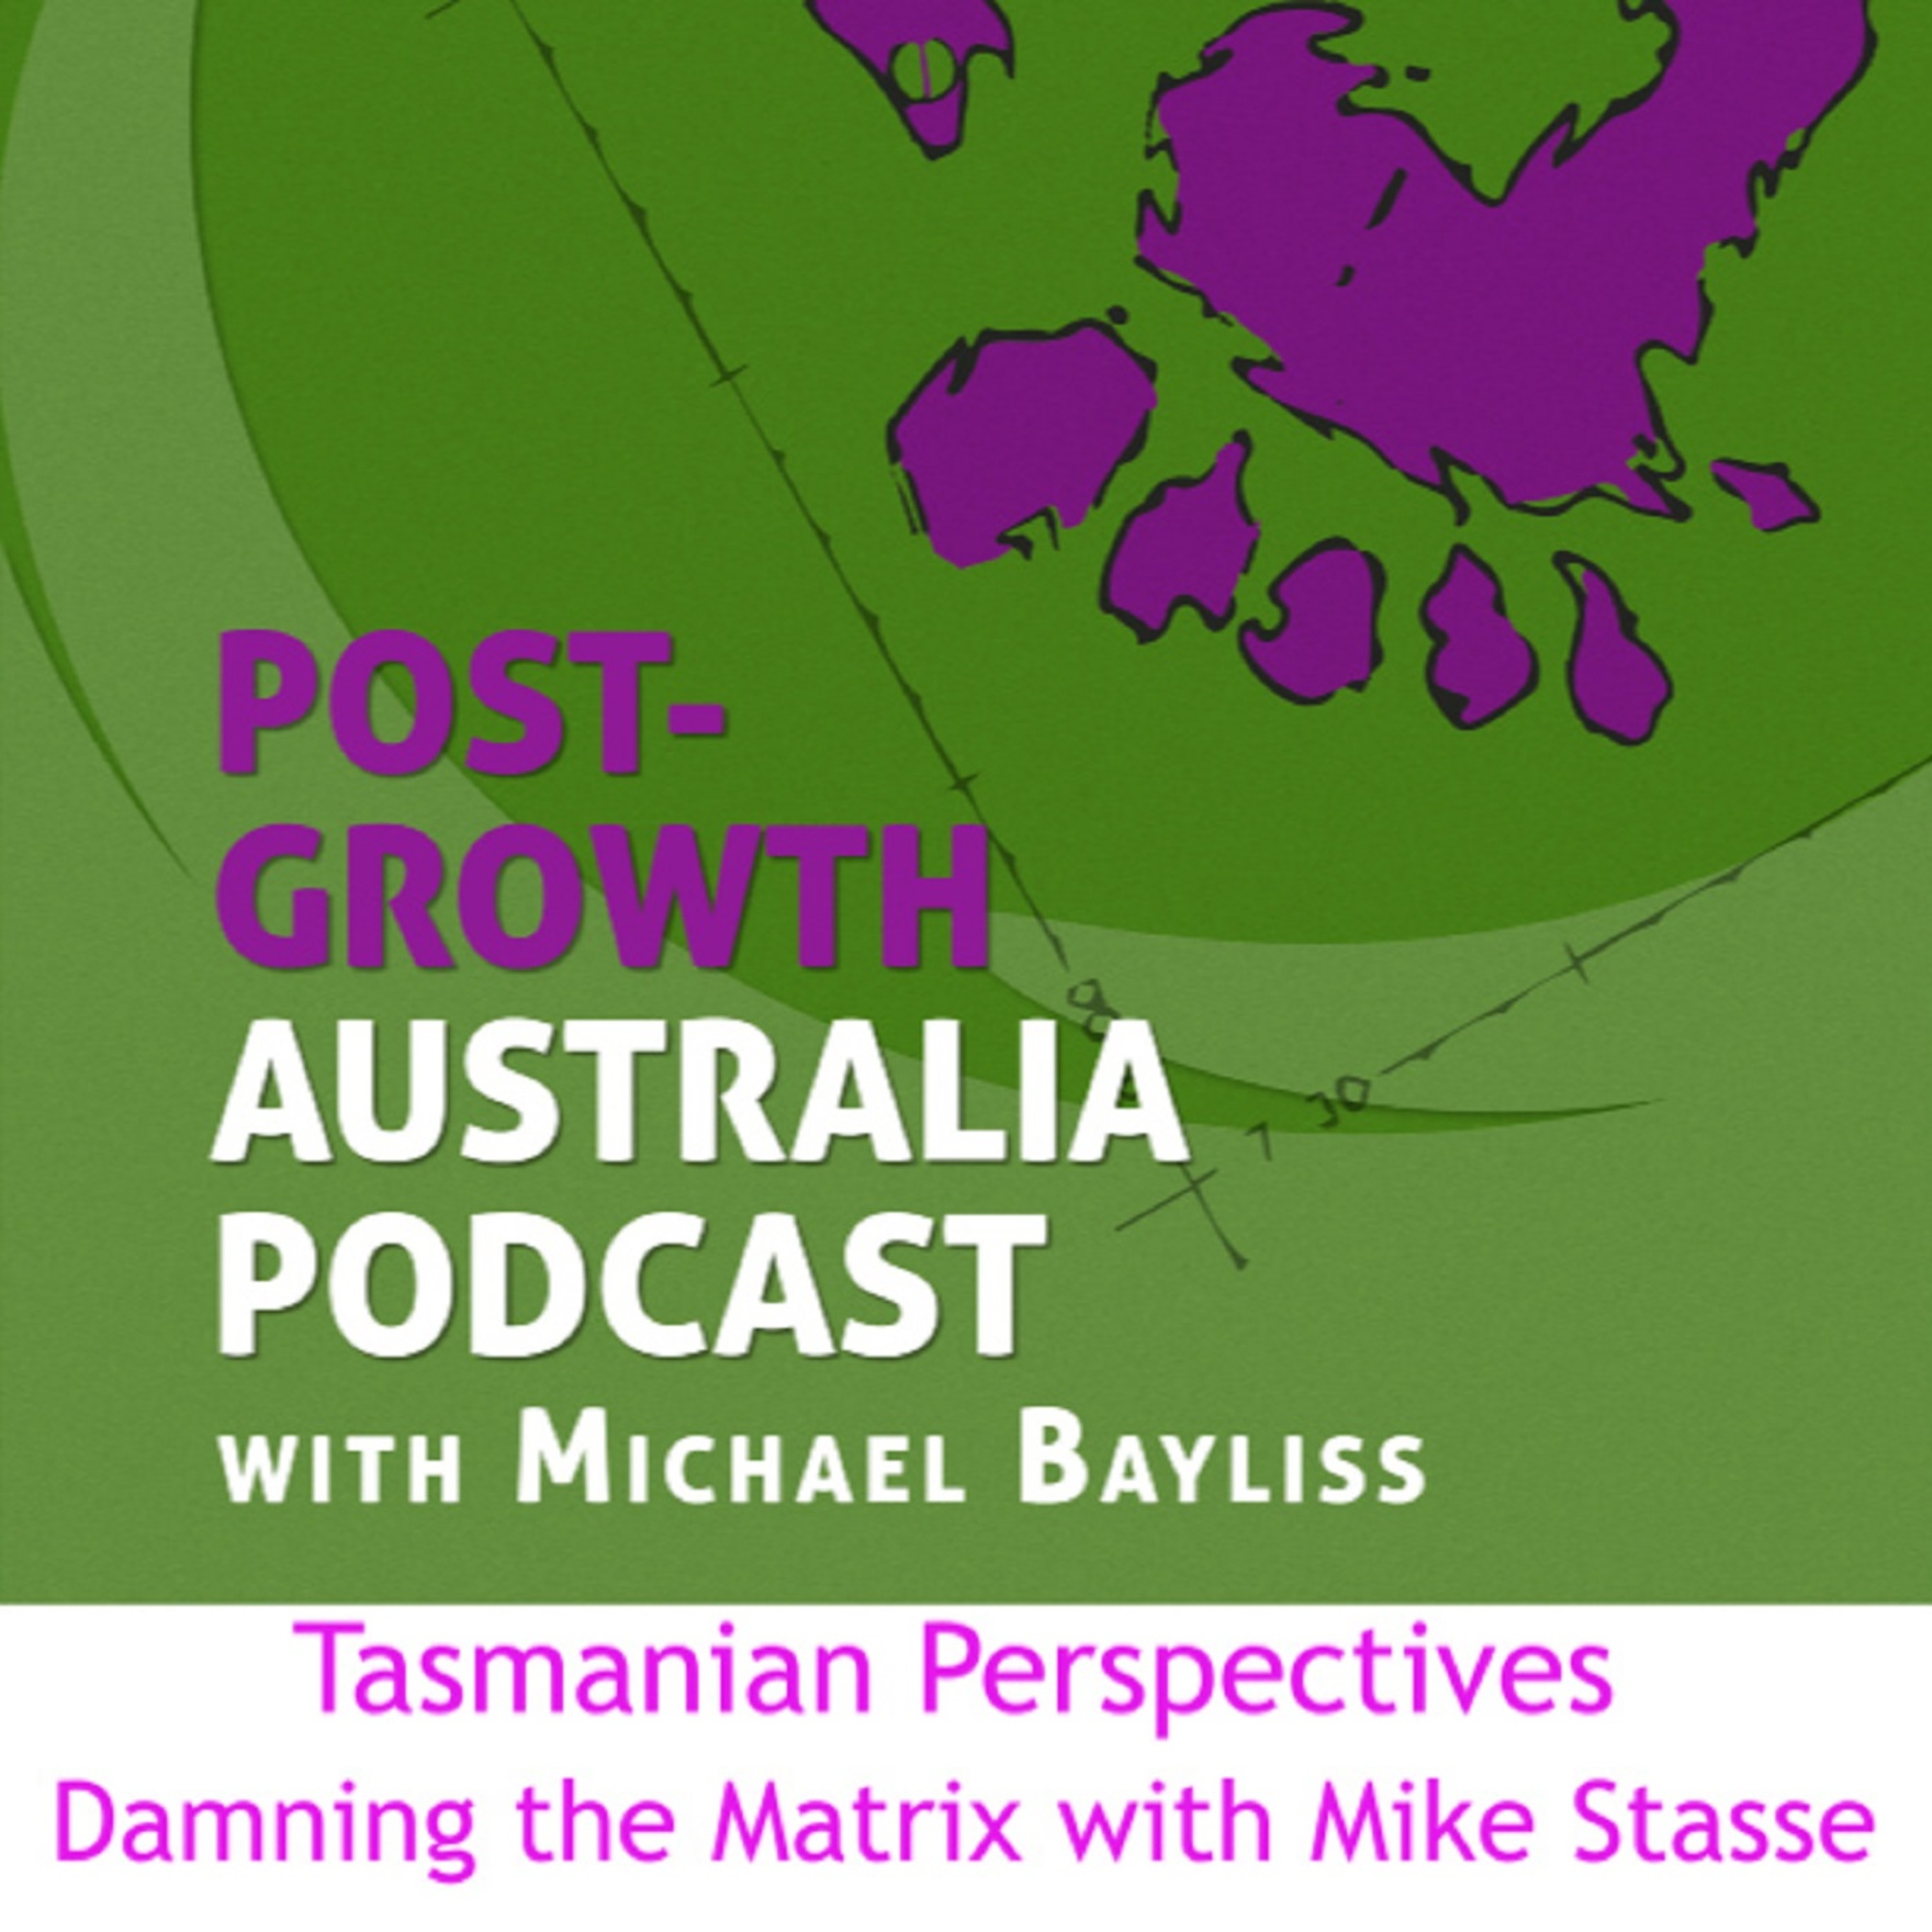 Tassie Perspectives 2:  Damning the Matrix with Mike Stasse